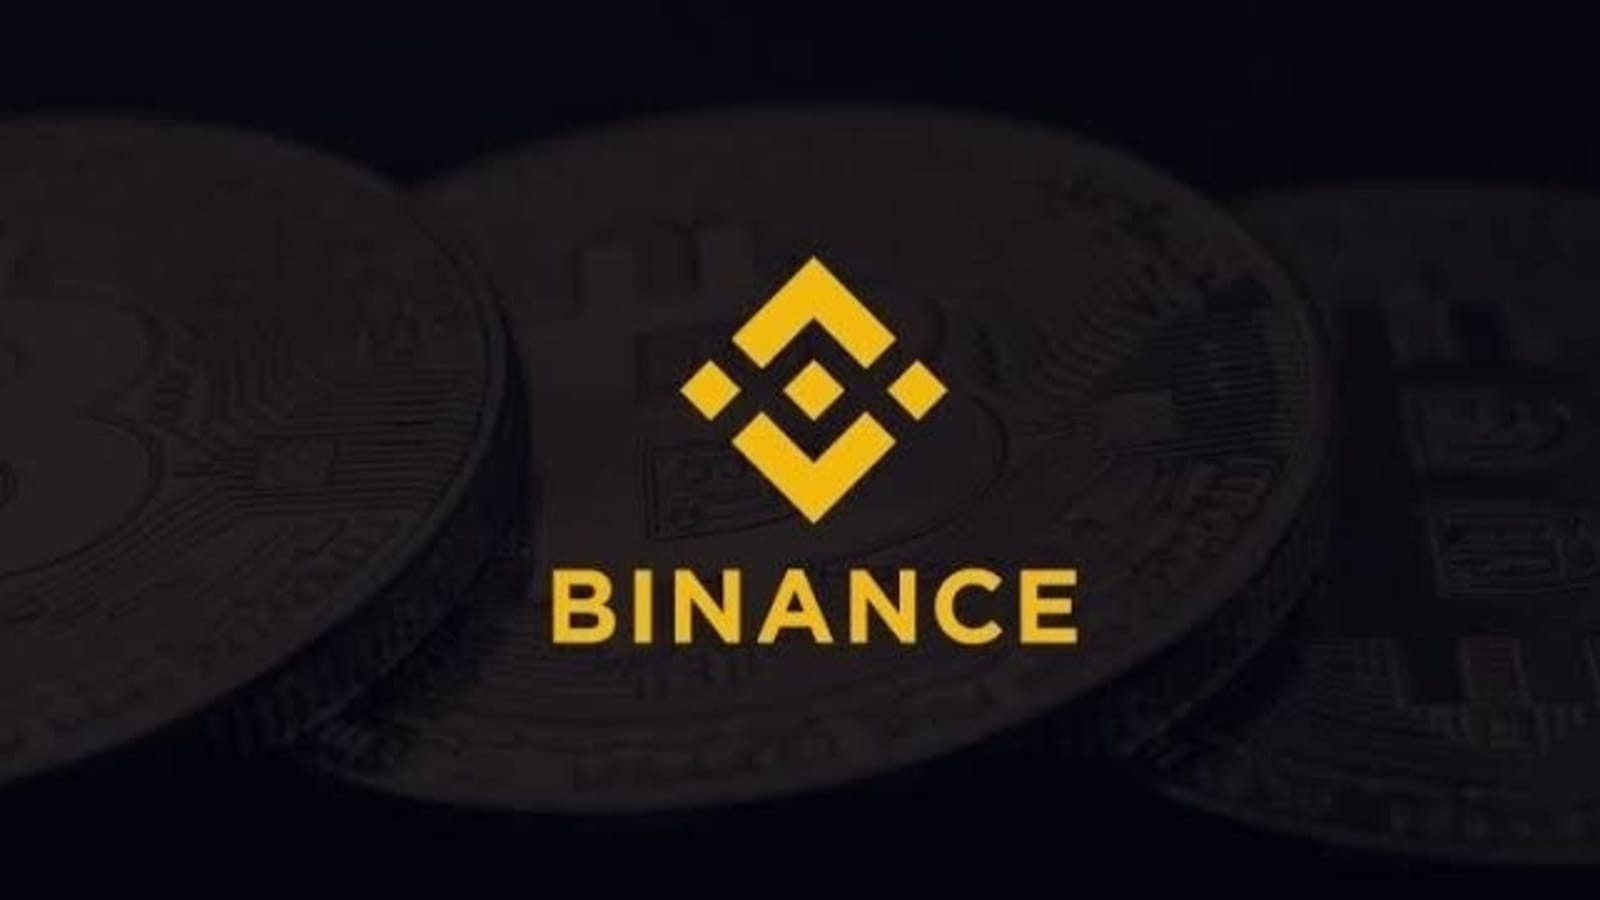 binance referral code does not exist